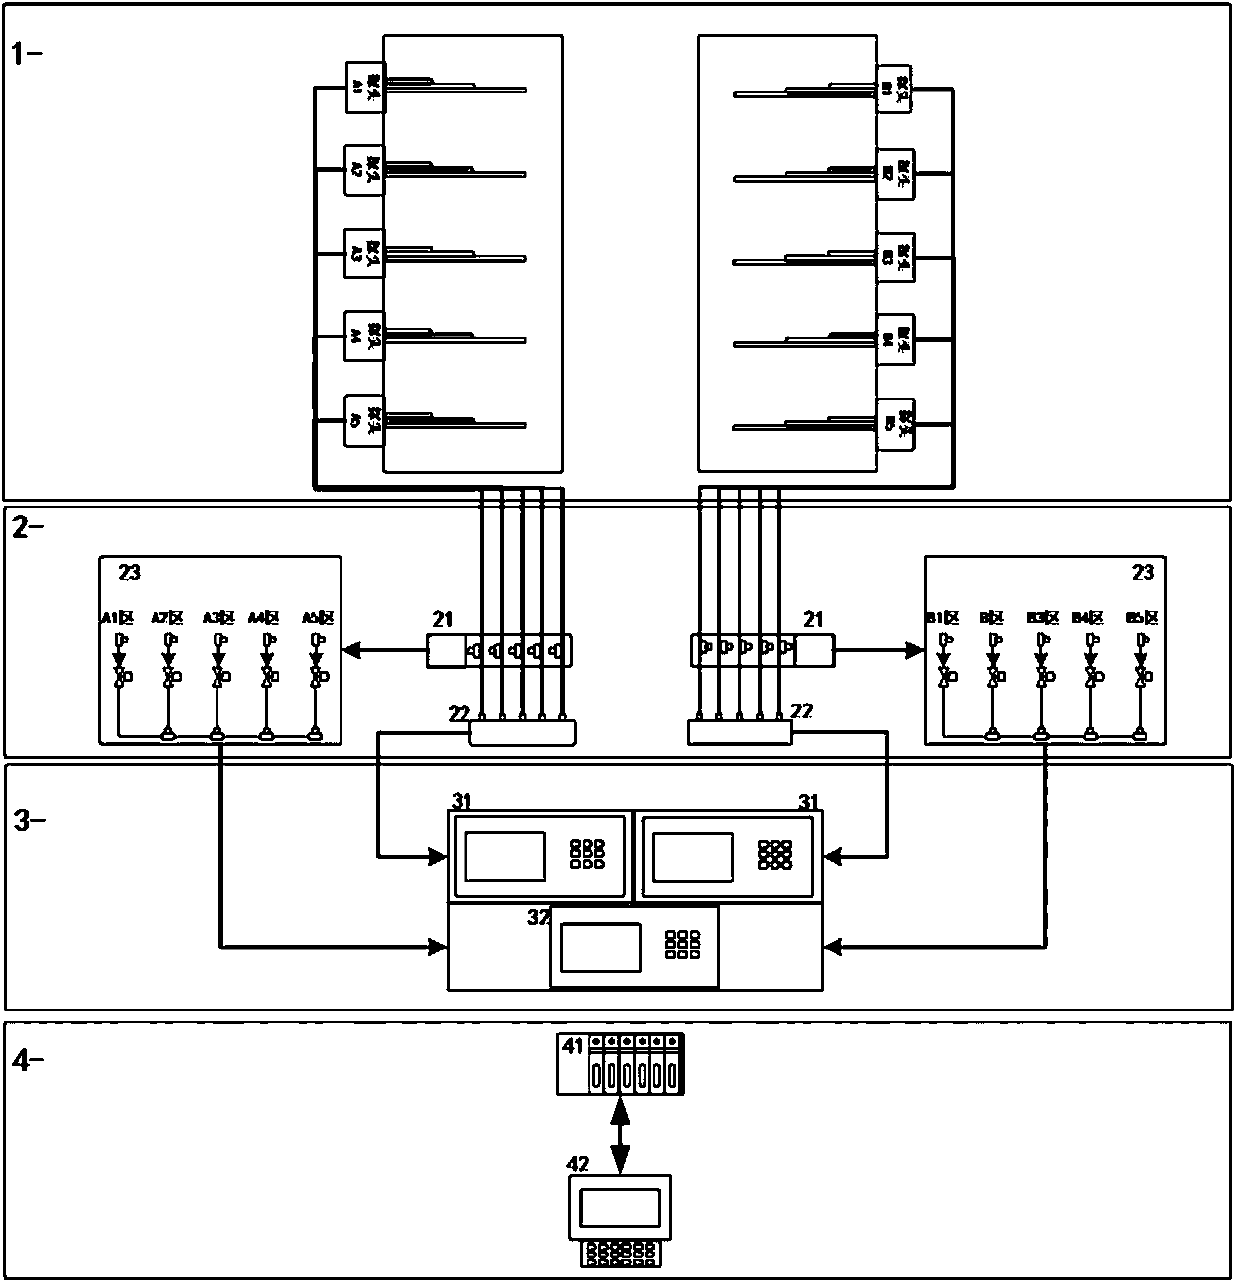 Gas measurement and control system and application thereof in denitration flue gas detection